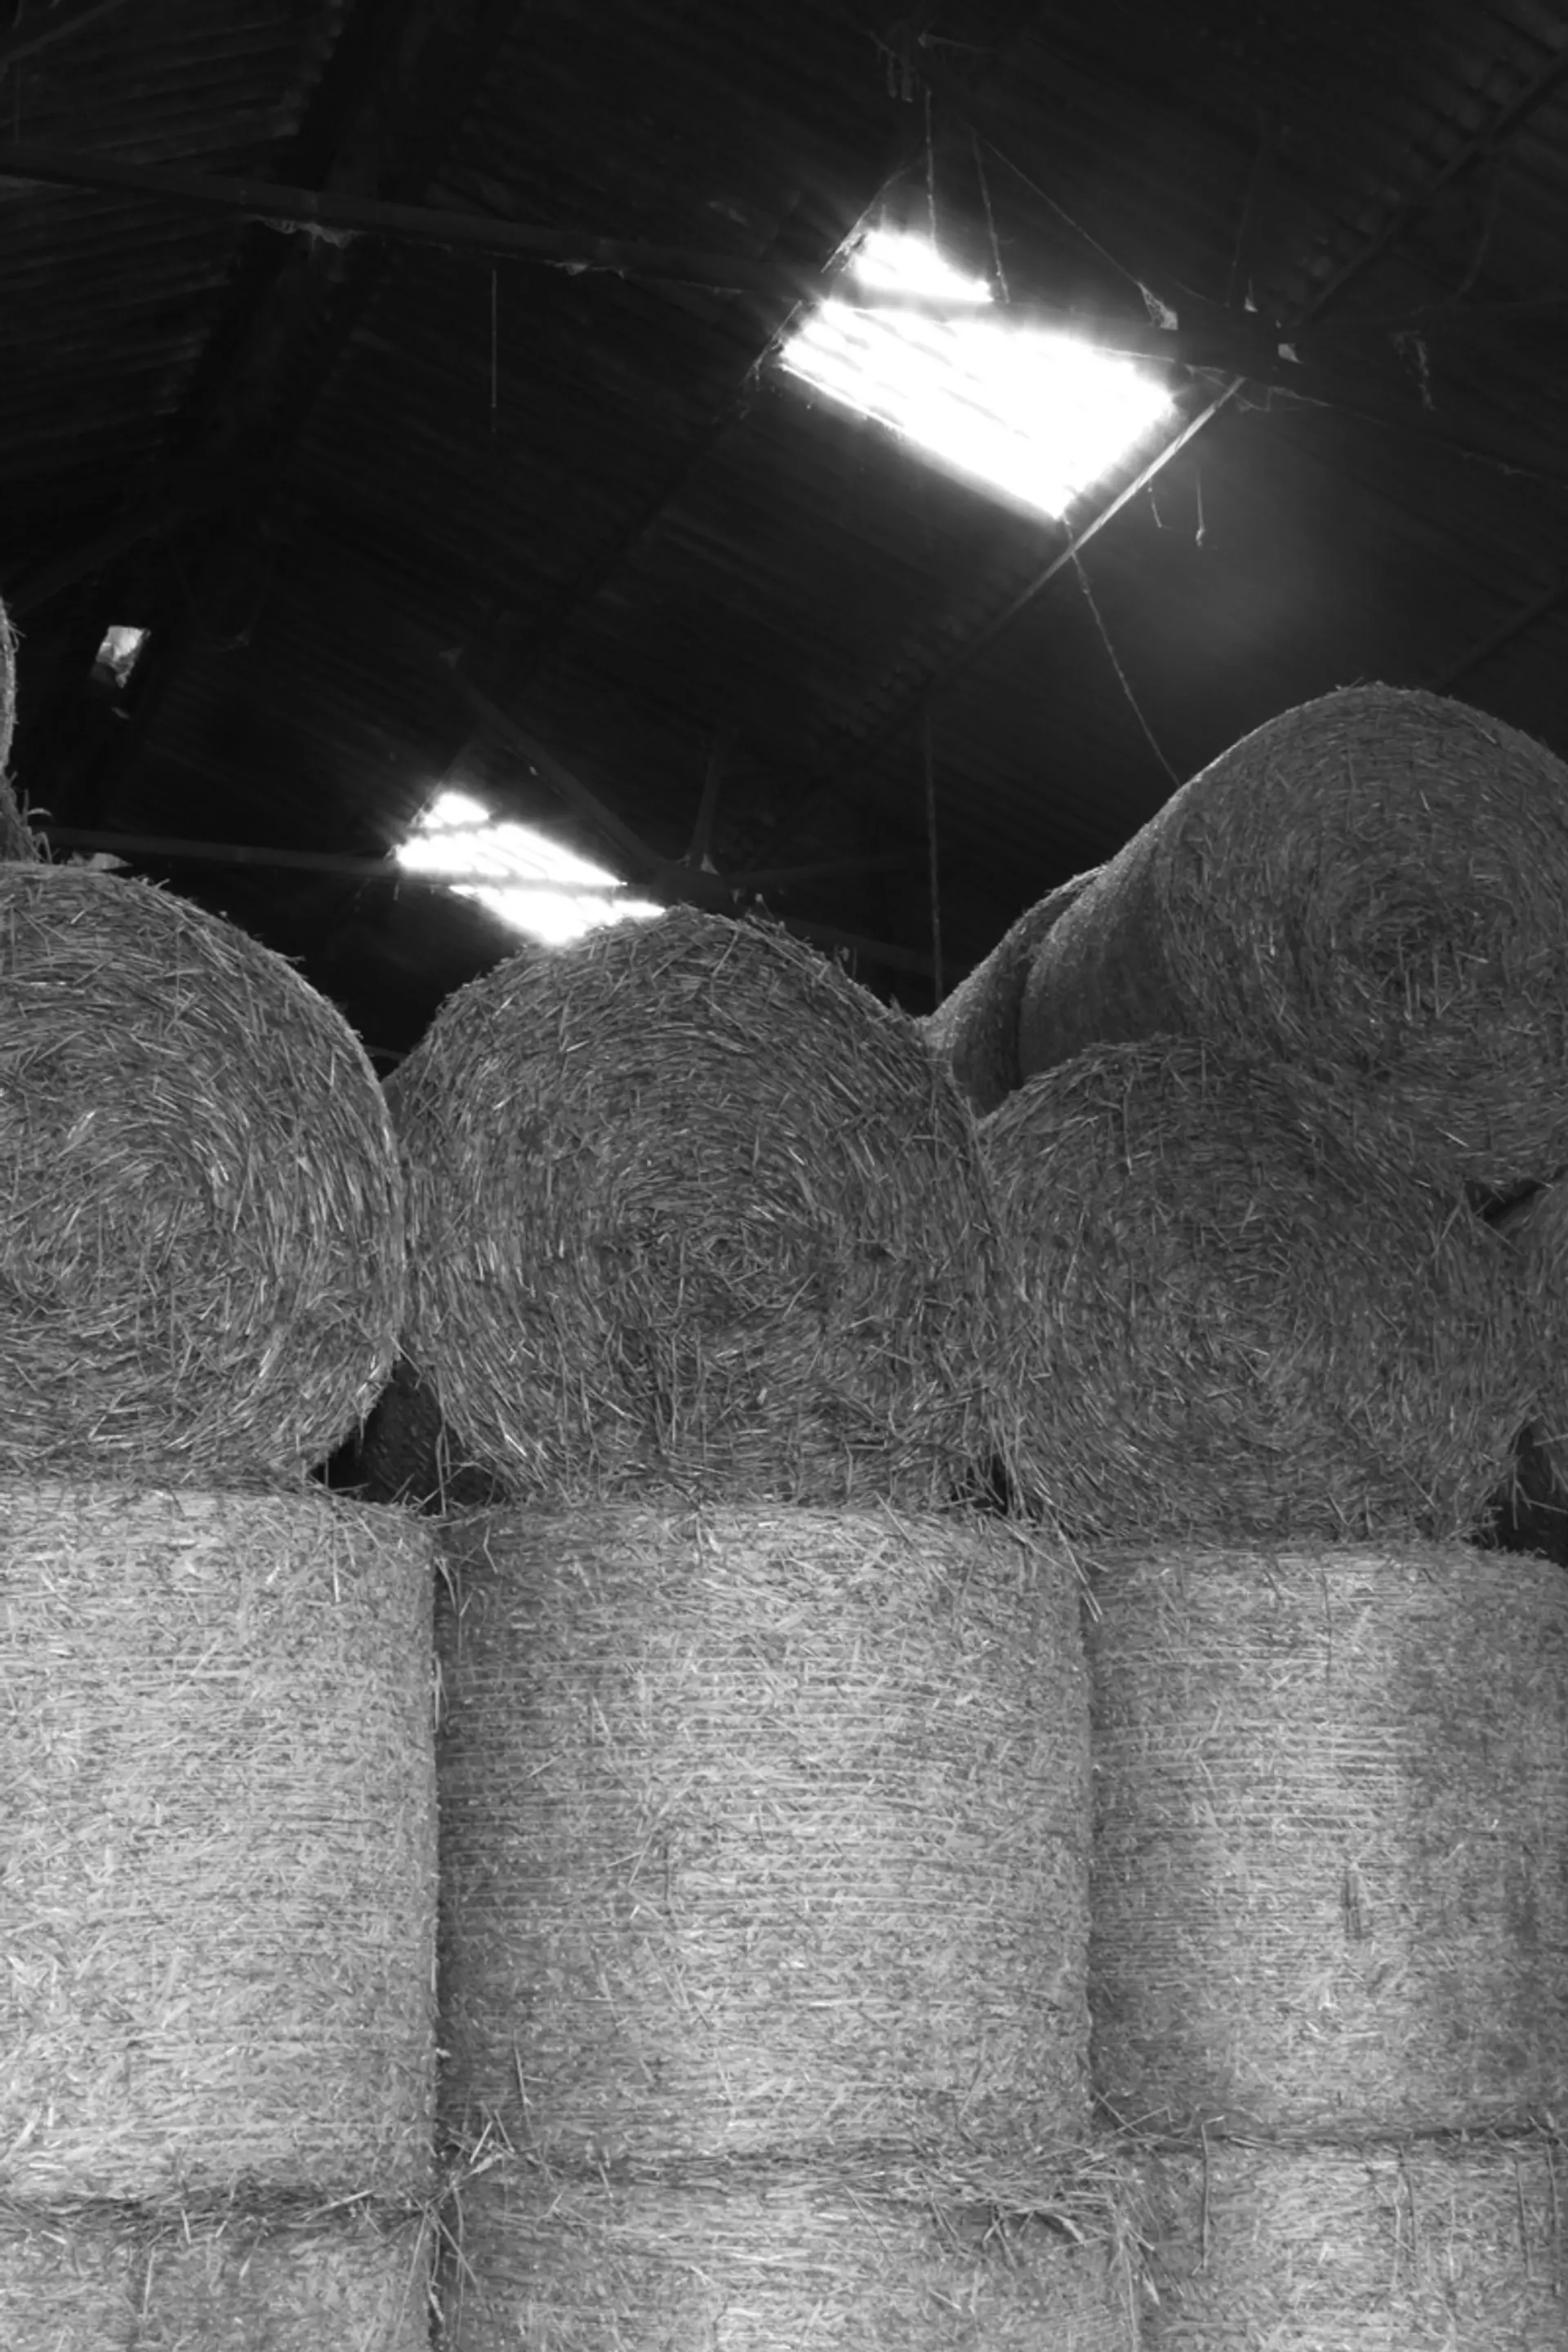 A grayscale image of cylindrical hay bales piled high in a barn lit by skylights.